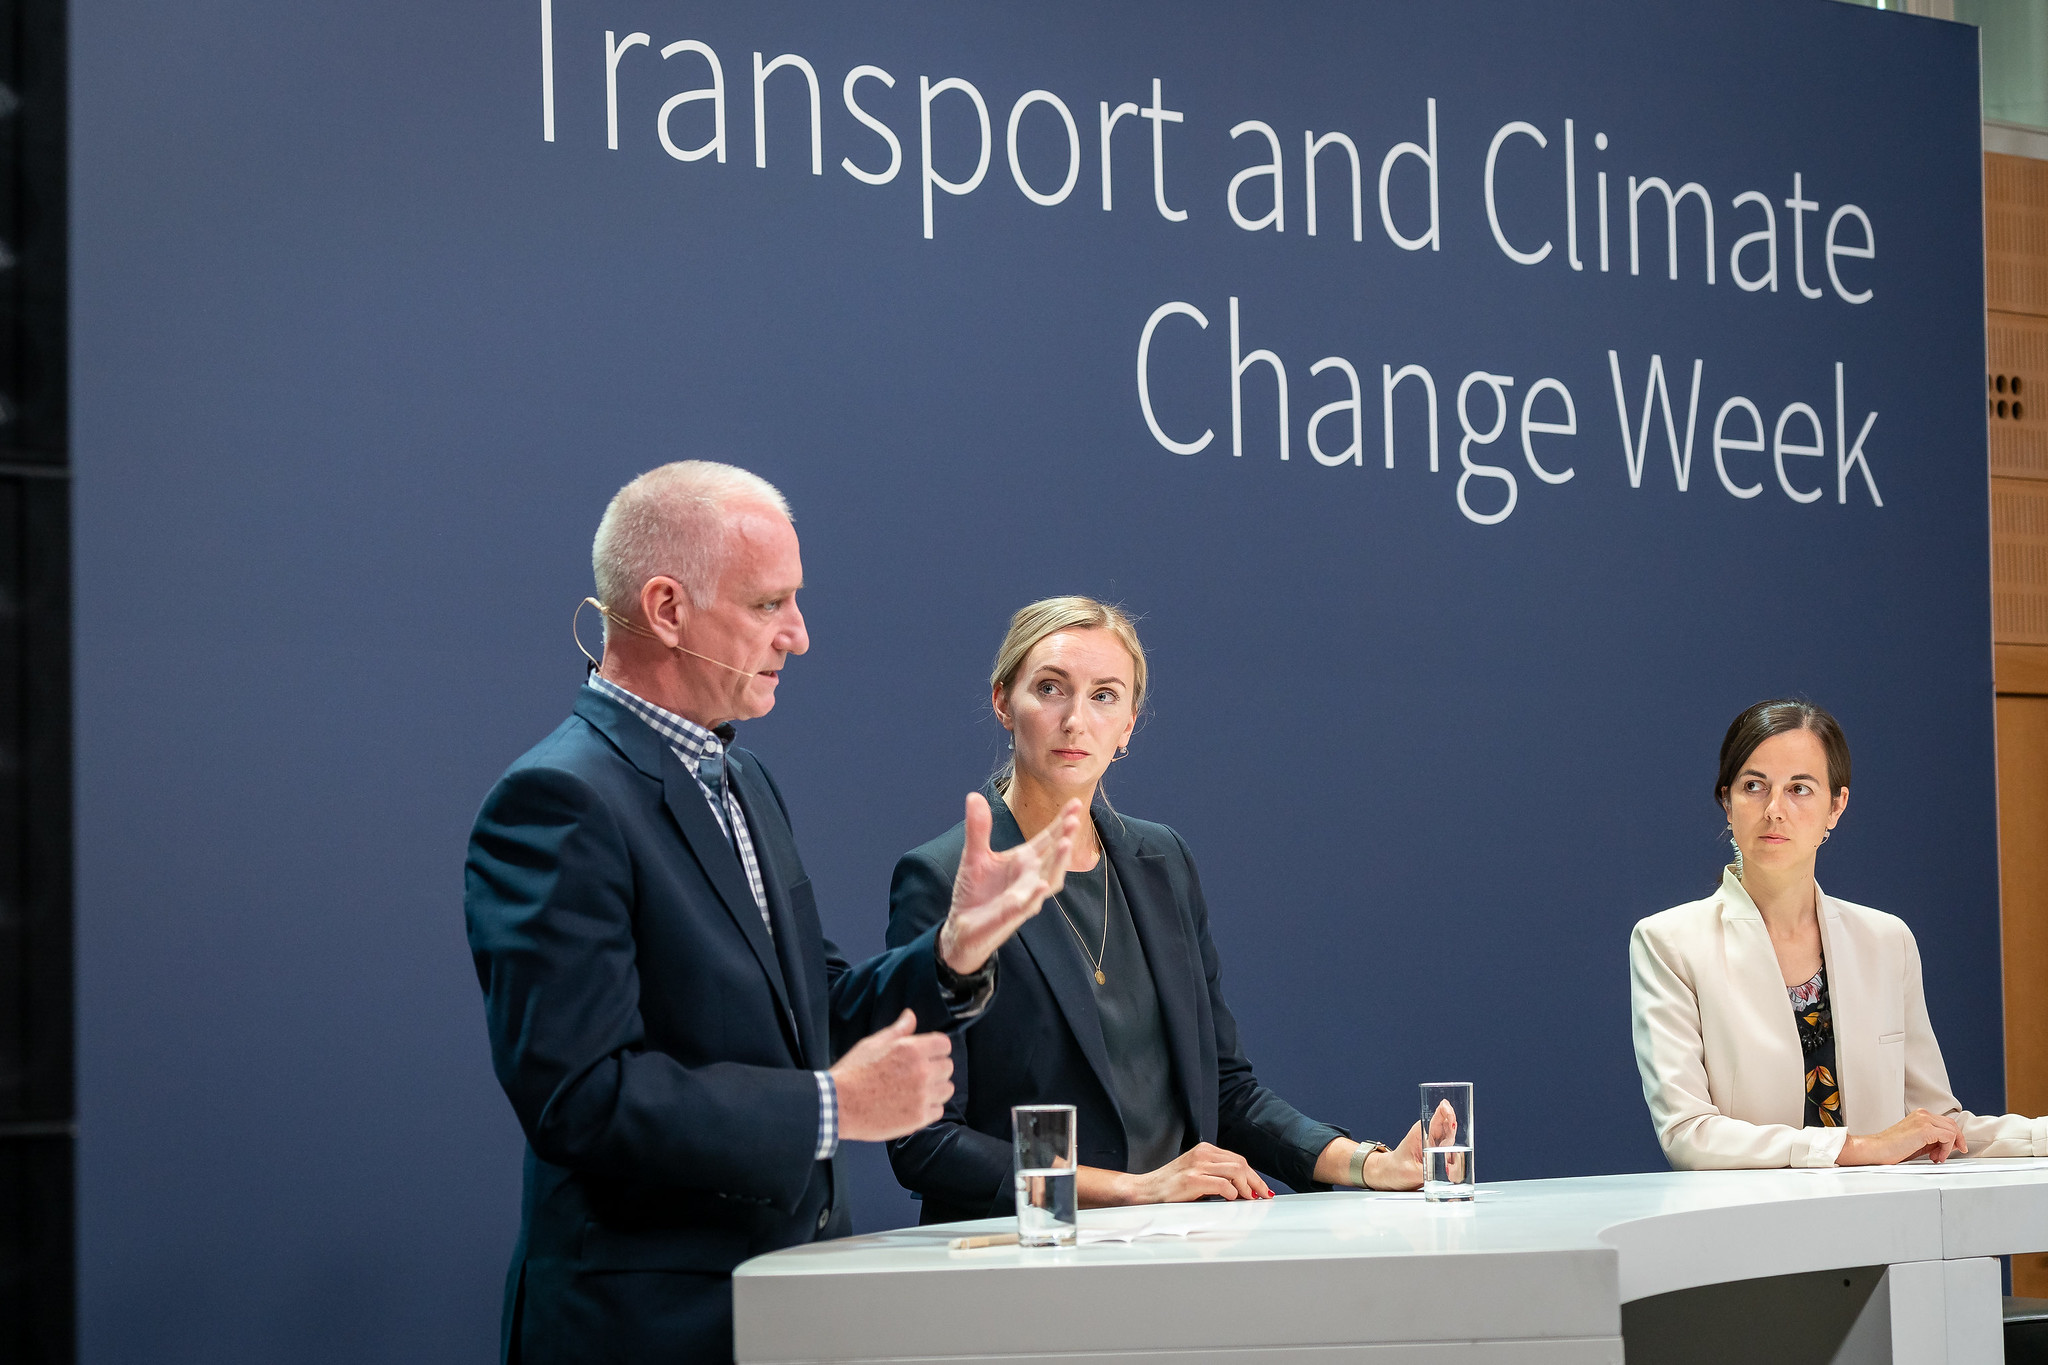 Transport and Climate Change Week